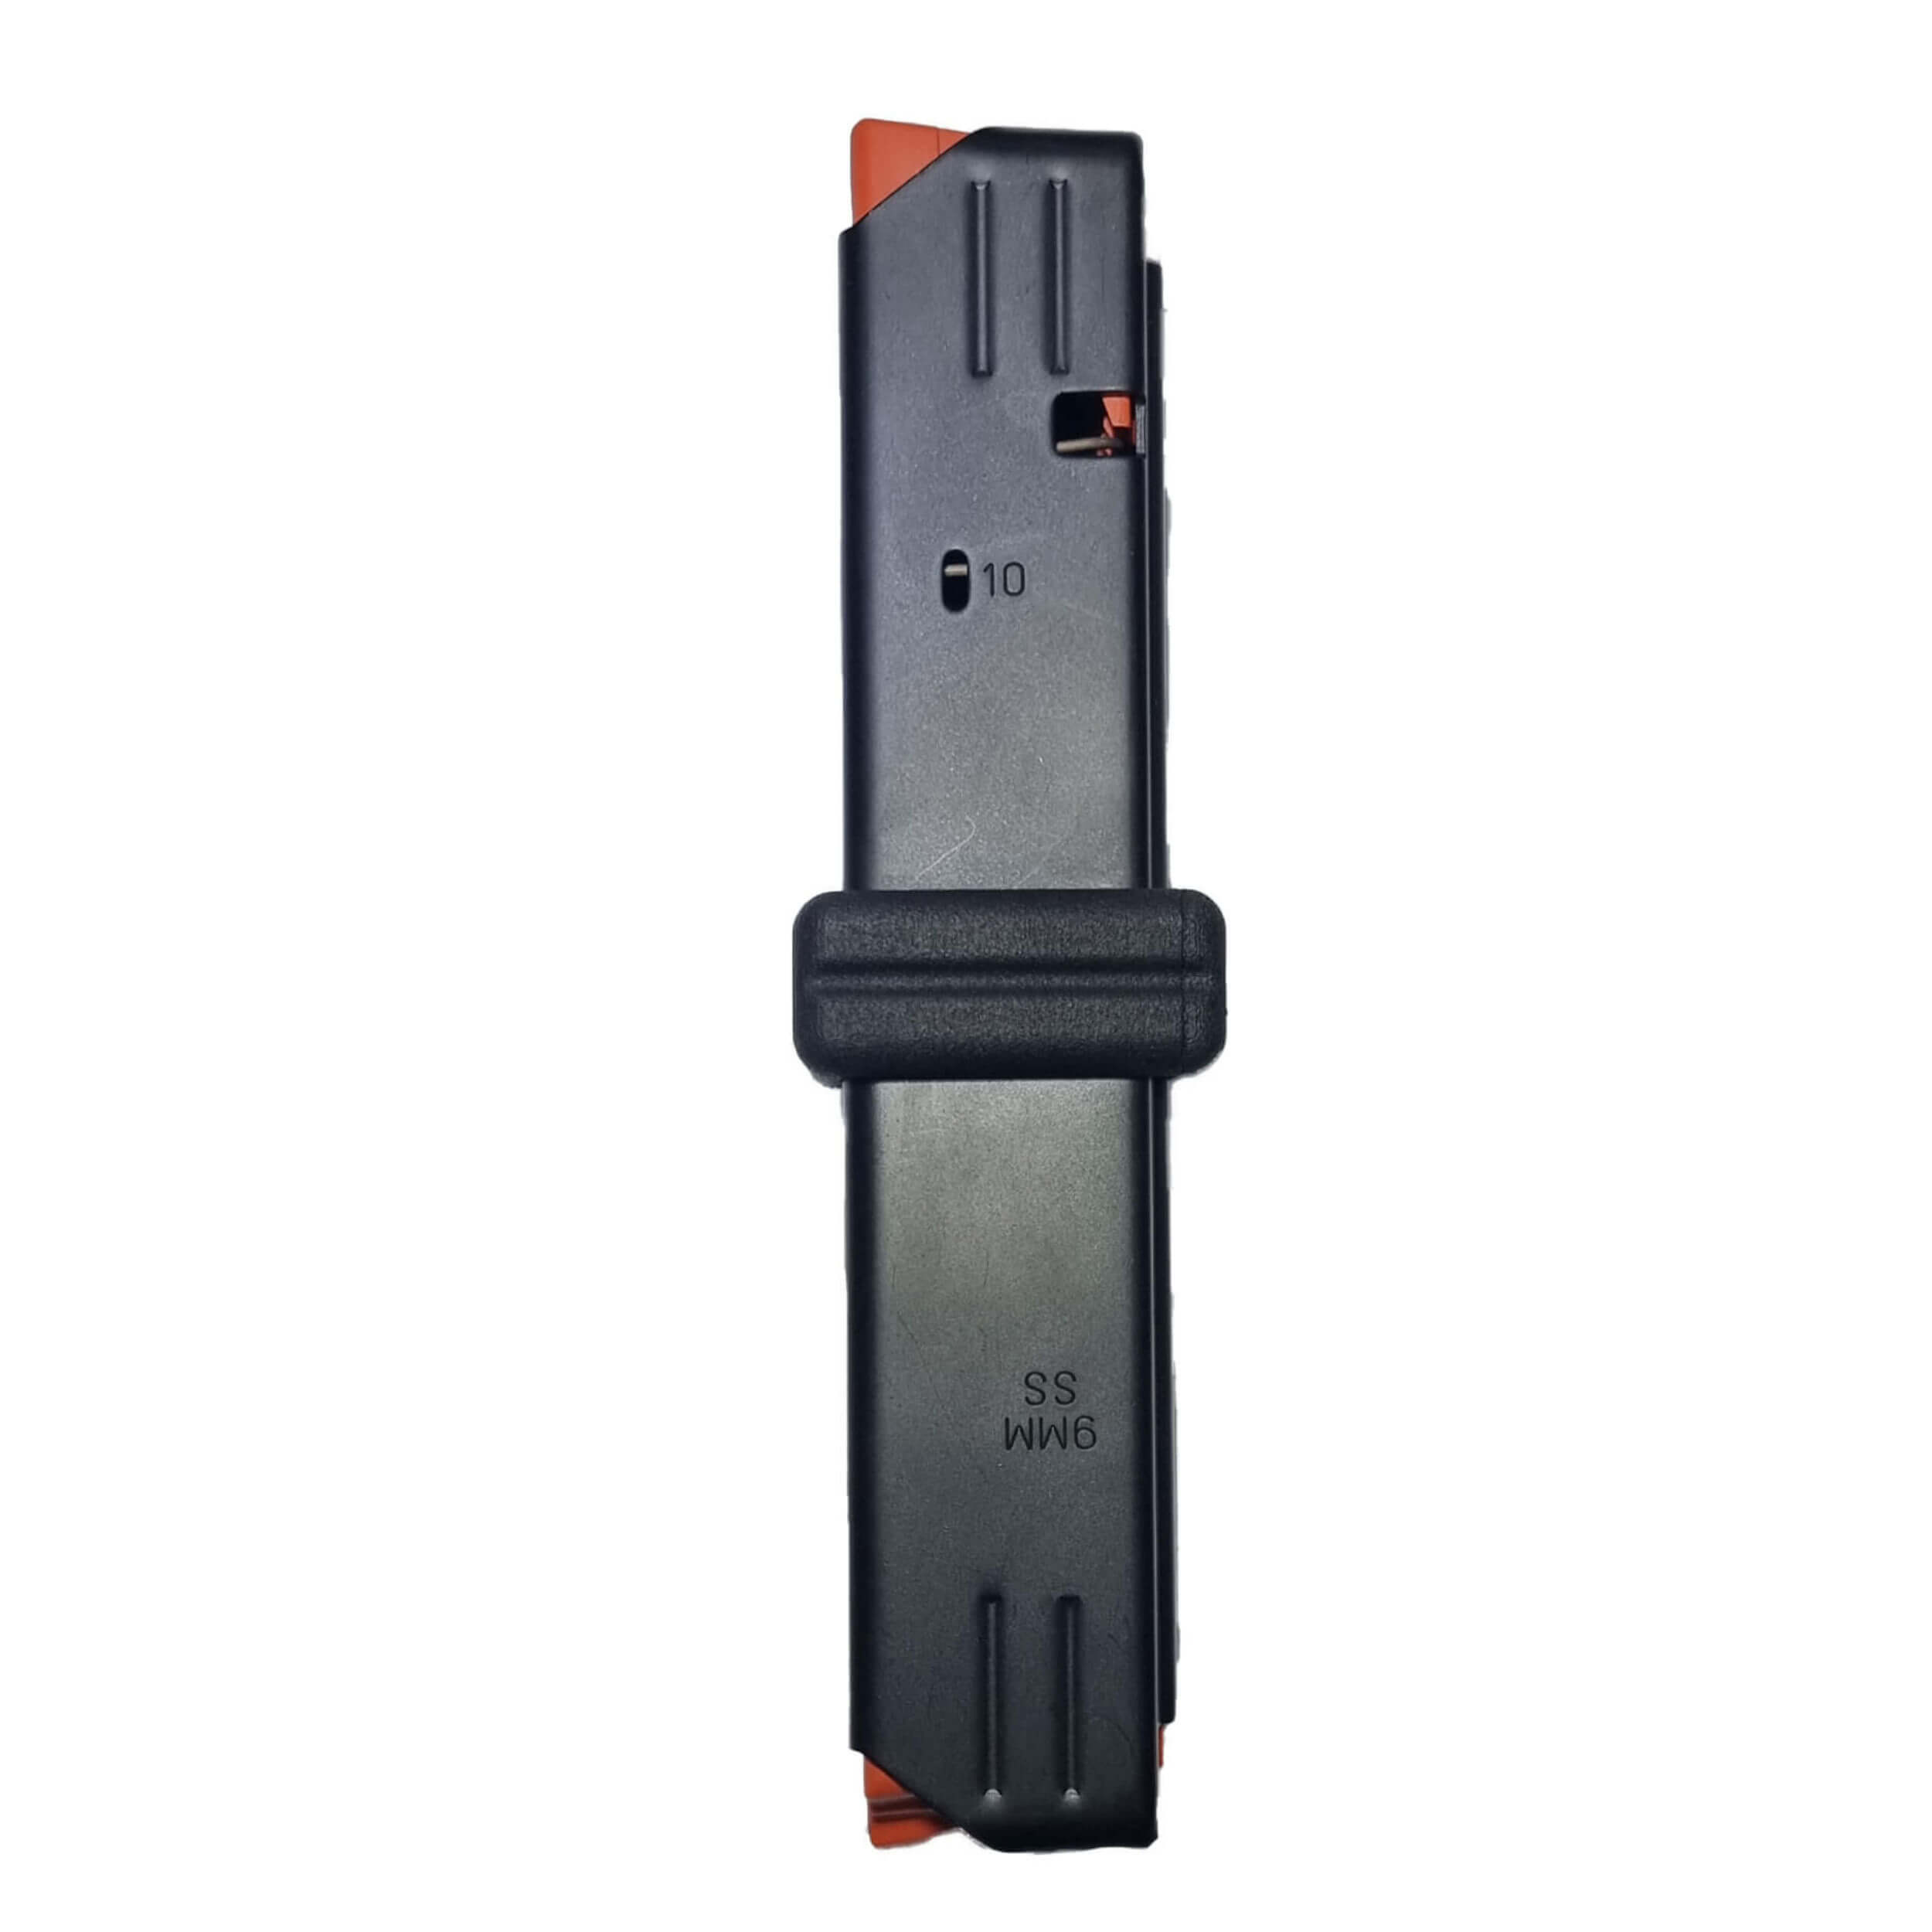 ISSProtectiontrade Magazine coupler with 2x Colt Magazines from DURAMAG USA